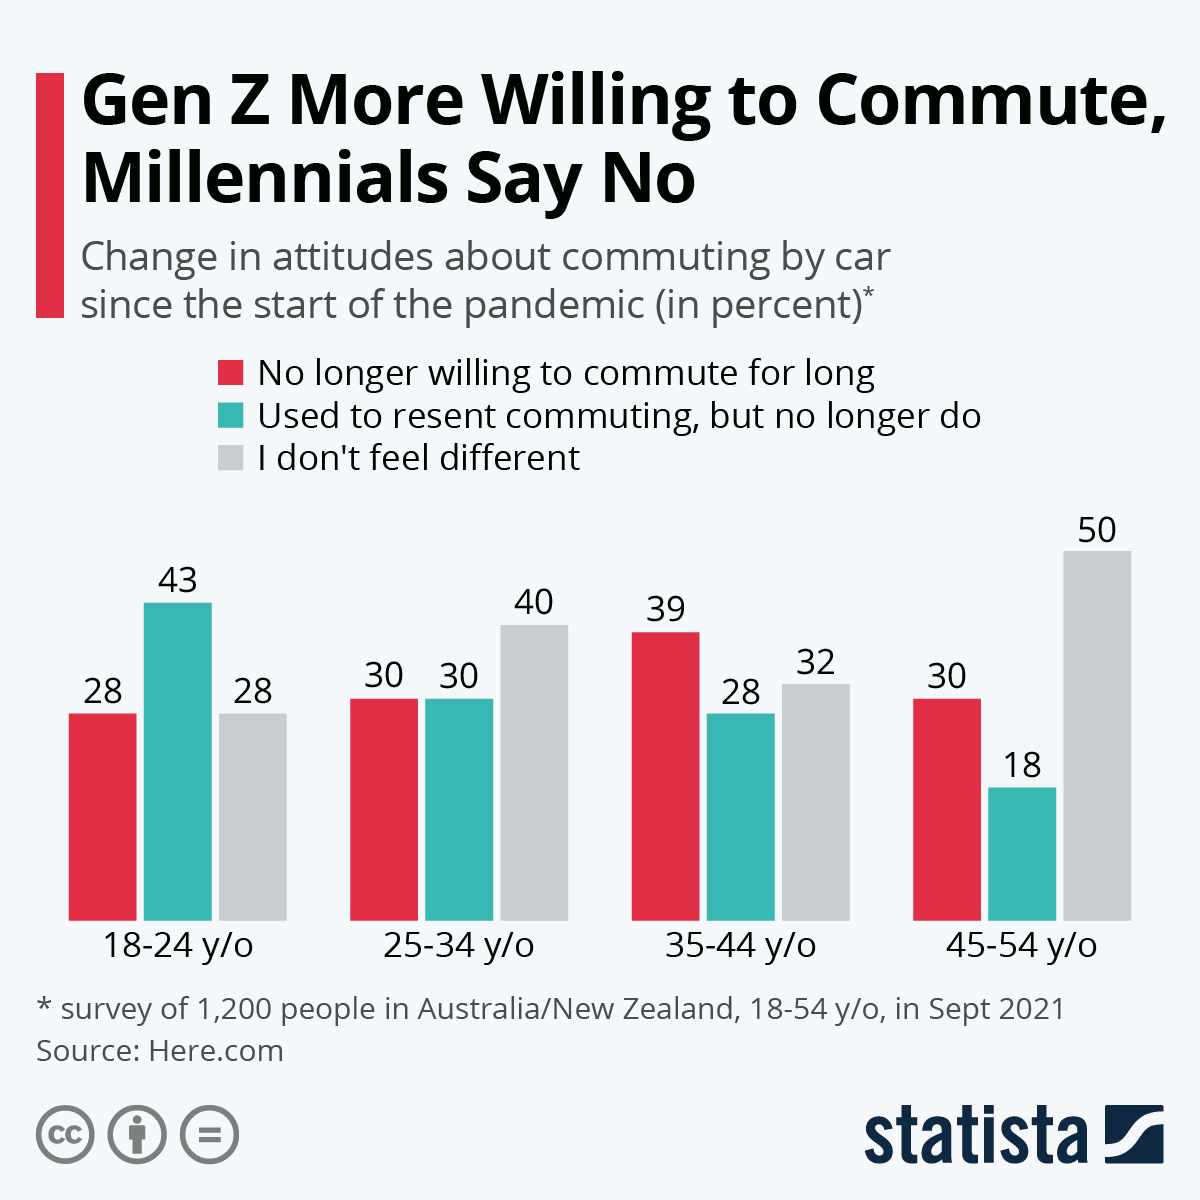 Gen Z More Willing to Commute, Millennials Say No